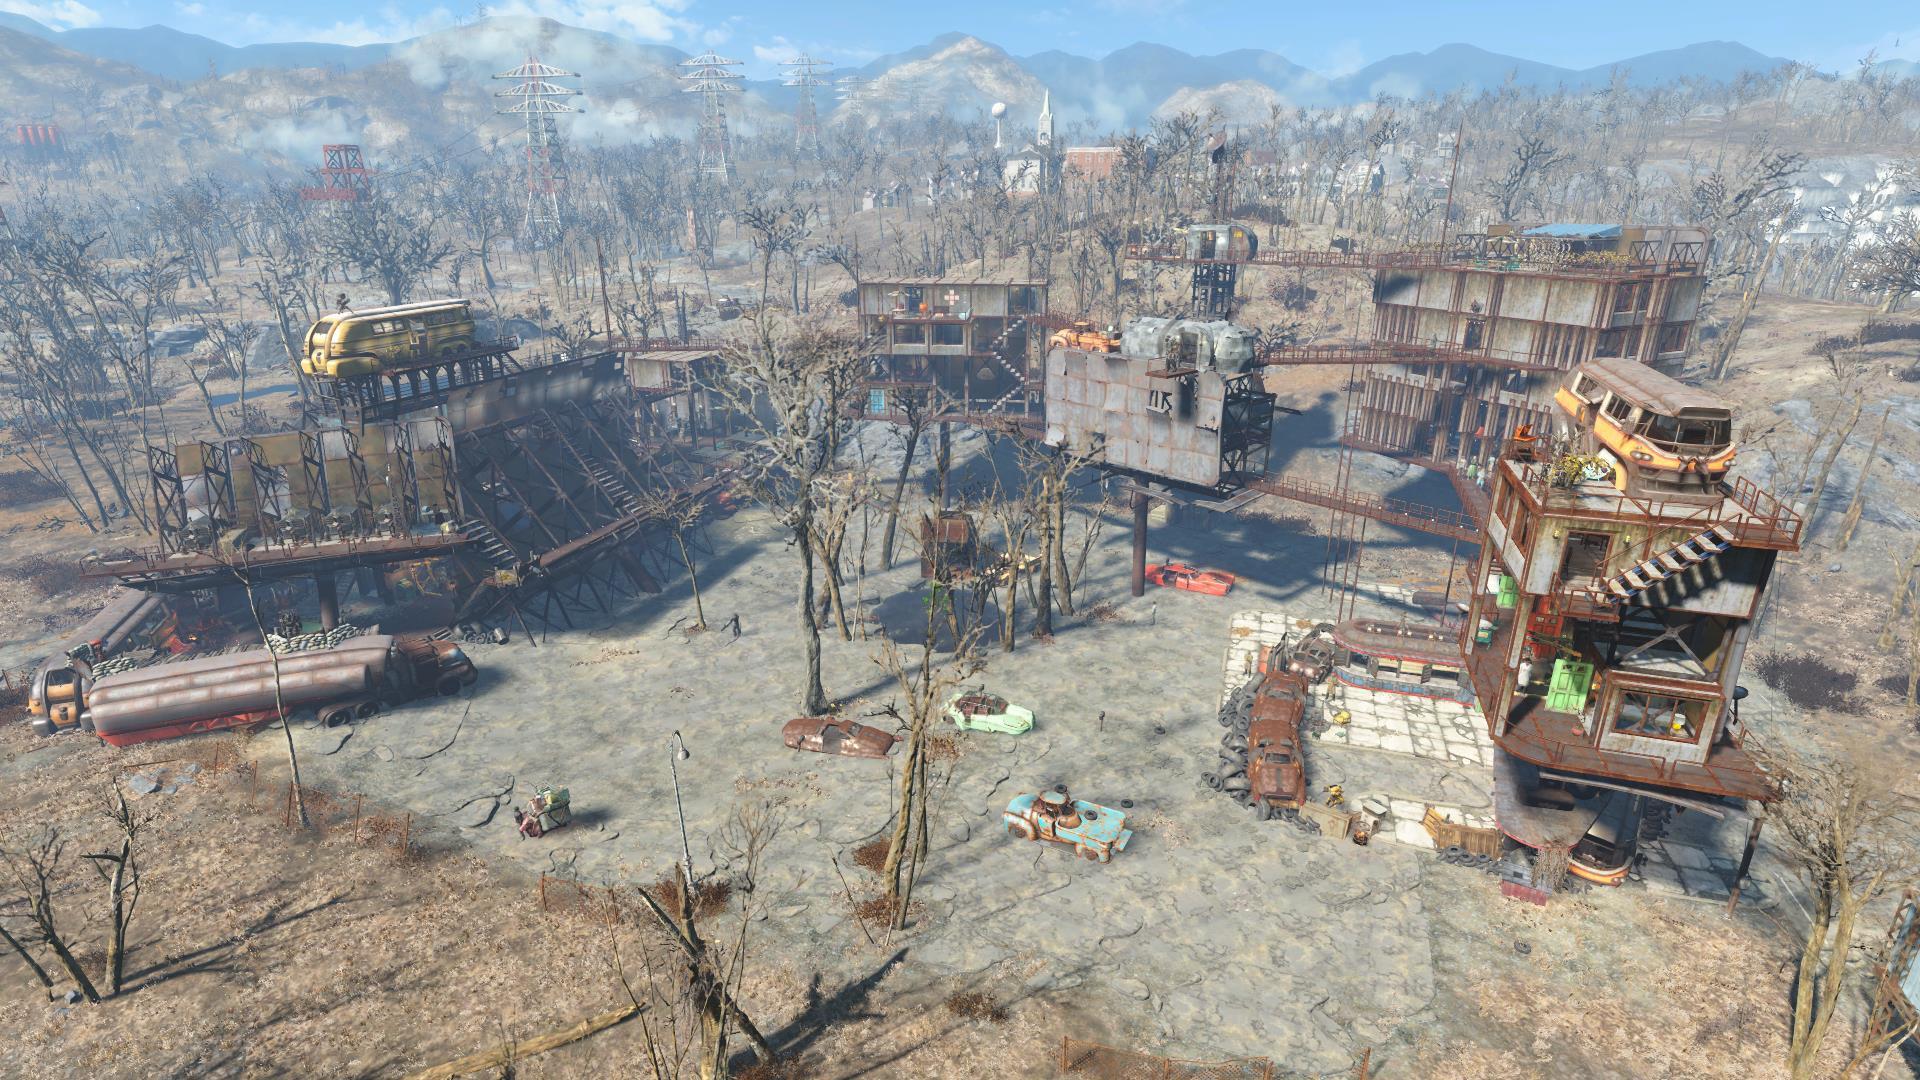 Conquest build new settlements and camping fallout 4 на русском фото 79